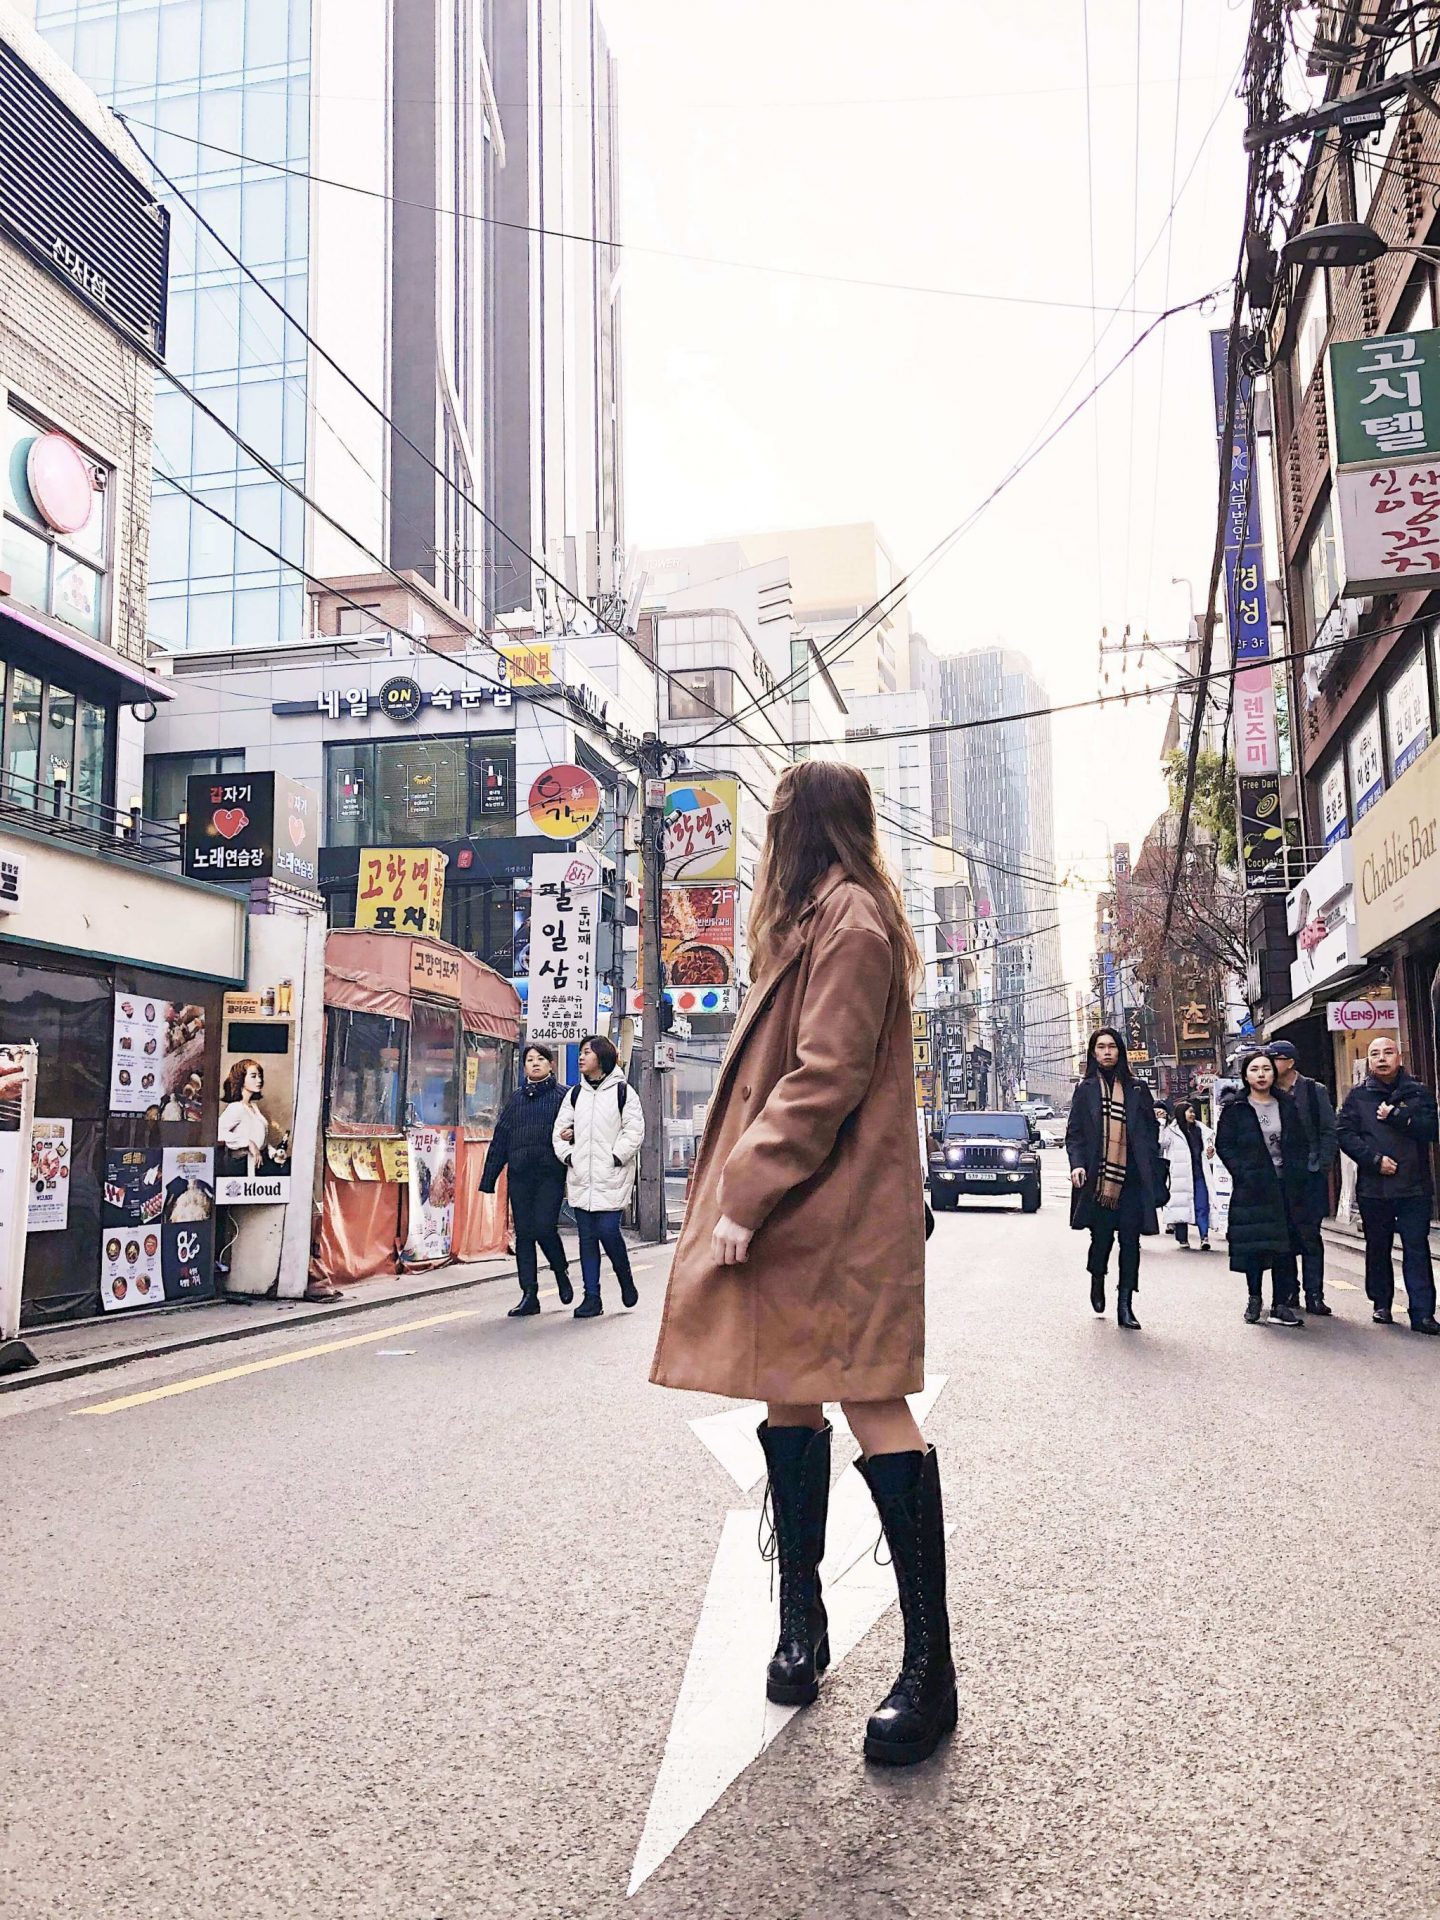 image of fii standing in the middle of a road looking backwards, wearing a knee-length camel coat, knee high black boots. There are tall buildings either side with Korean signs on them